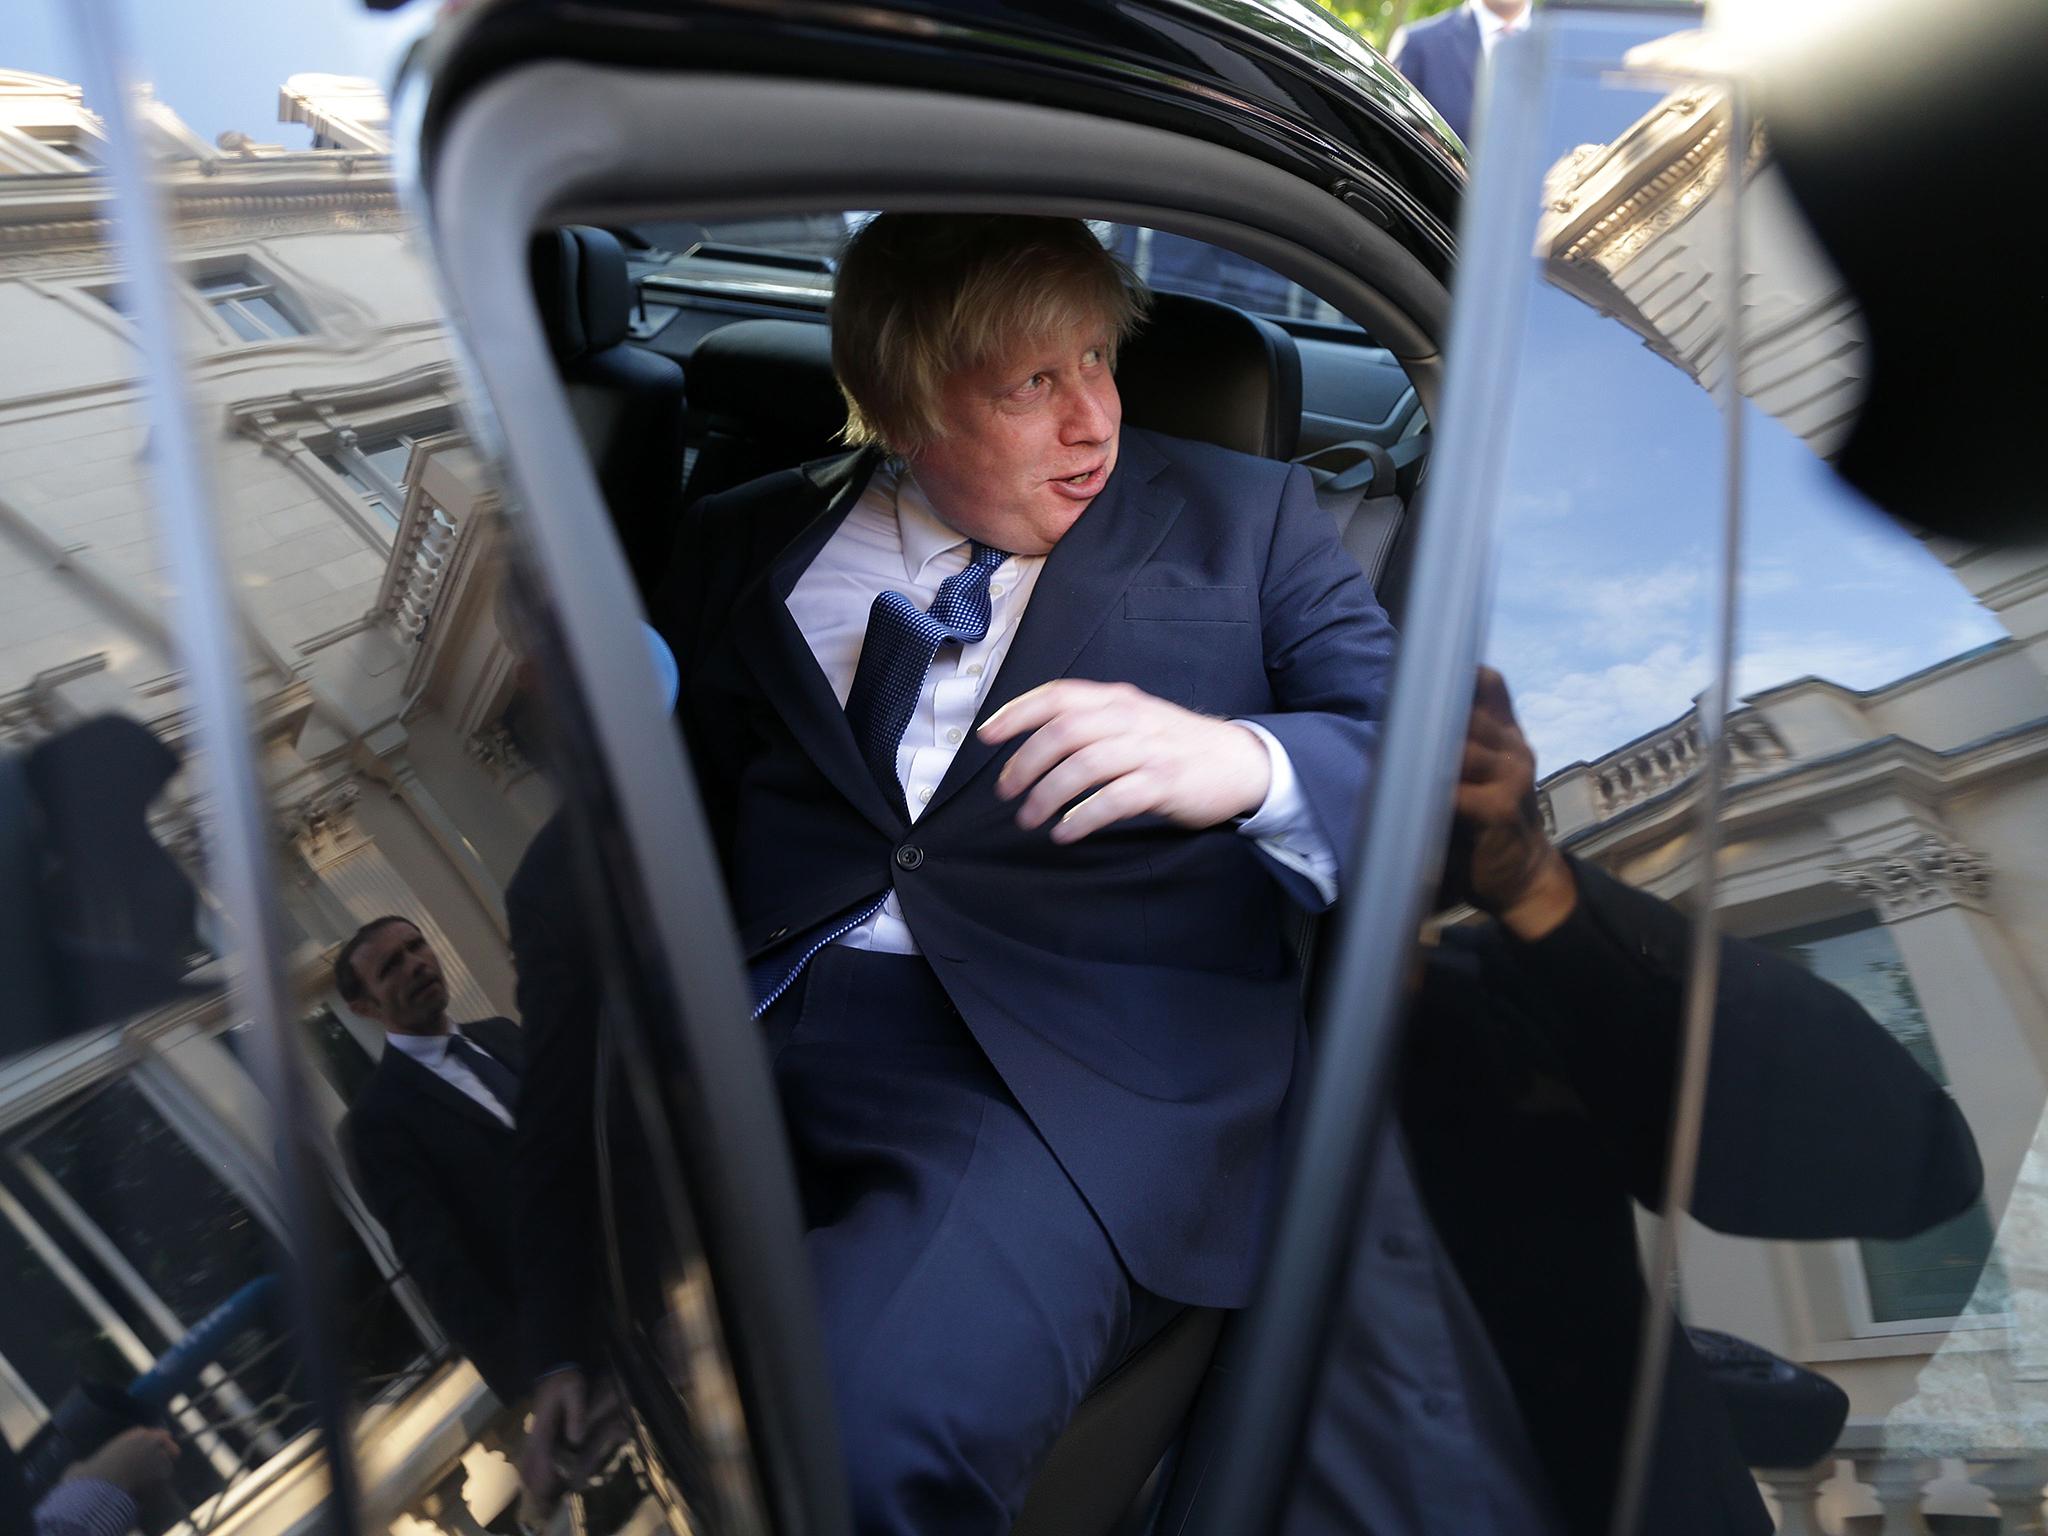 Foreign Secretary Boris Johnson was one of the most prominent campaigners for Brexit